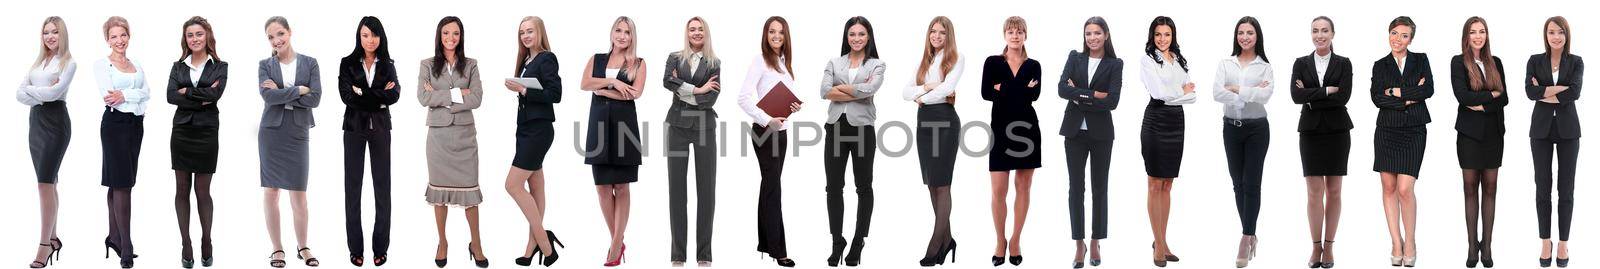 collage of successful modern businesswoman. isolated on white background